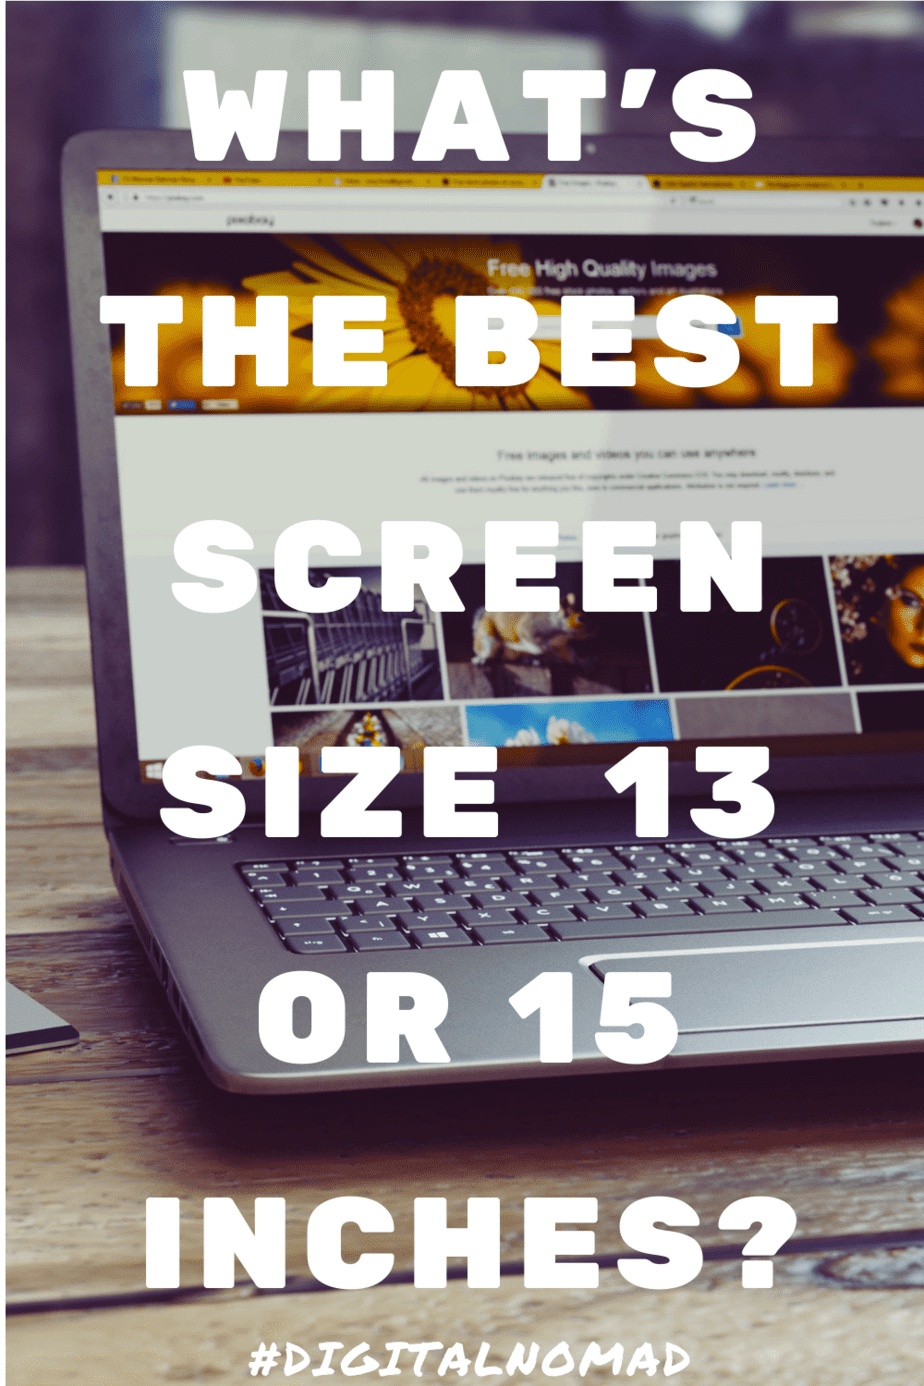 What is the best laptop screen size for travel?